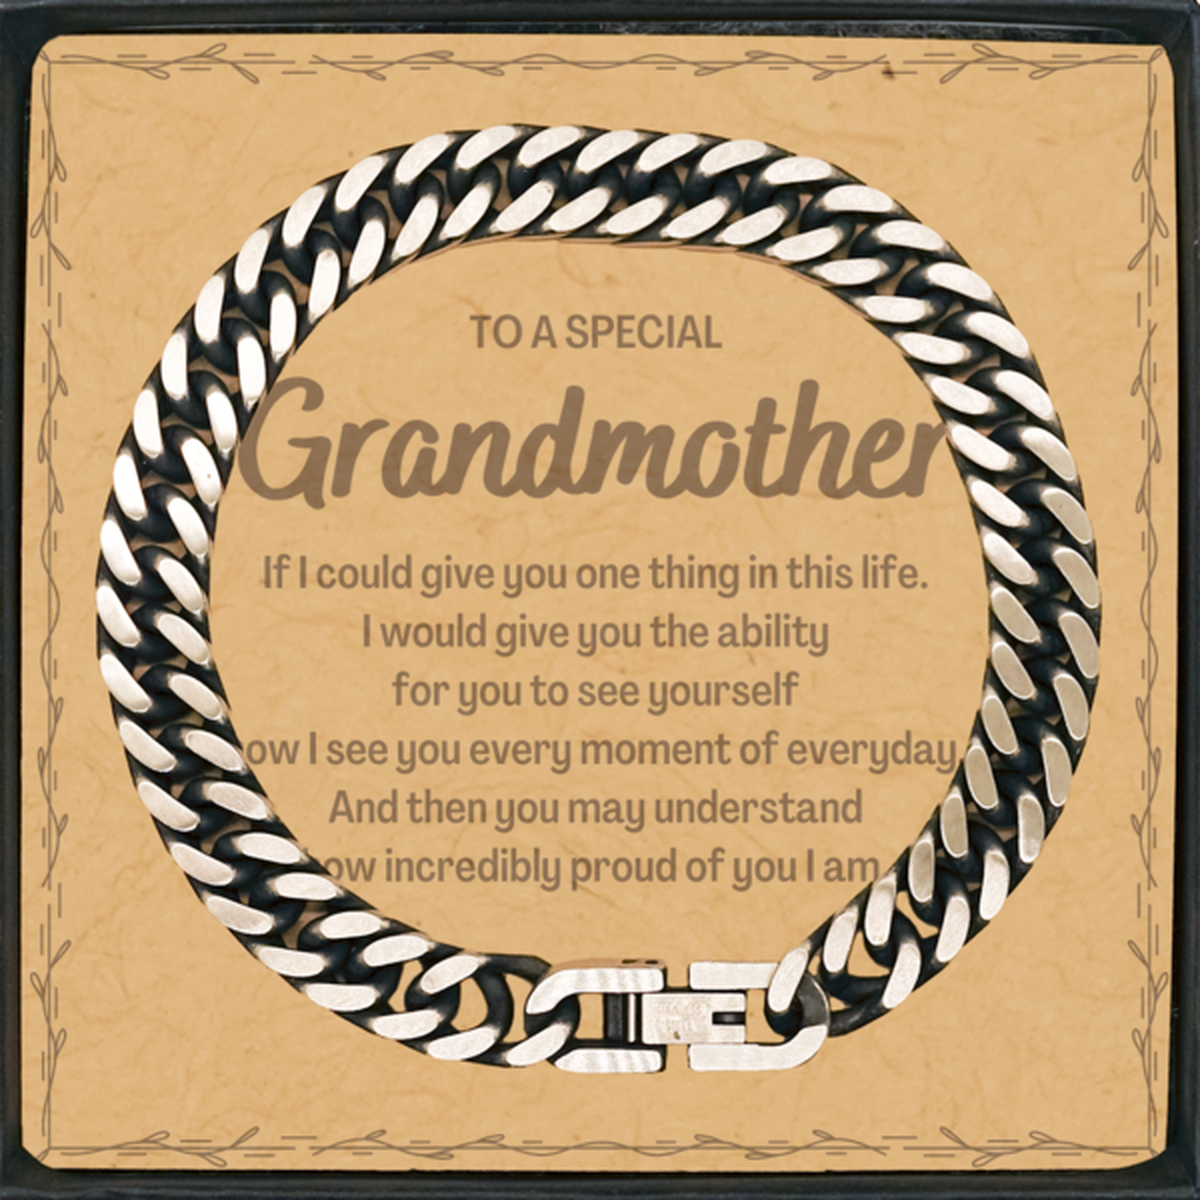 To My Grandmother Cuban Link Chain Bracelet, Gifts For Grandmother Message Card, Inspirational Gifts for Christmas Birthday, Epic Gifts for Grandmother To A Special Grandmother how incredibly proud of you I am